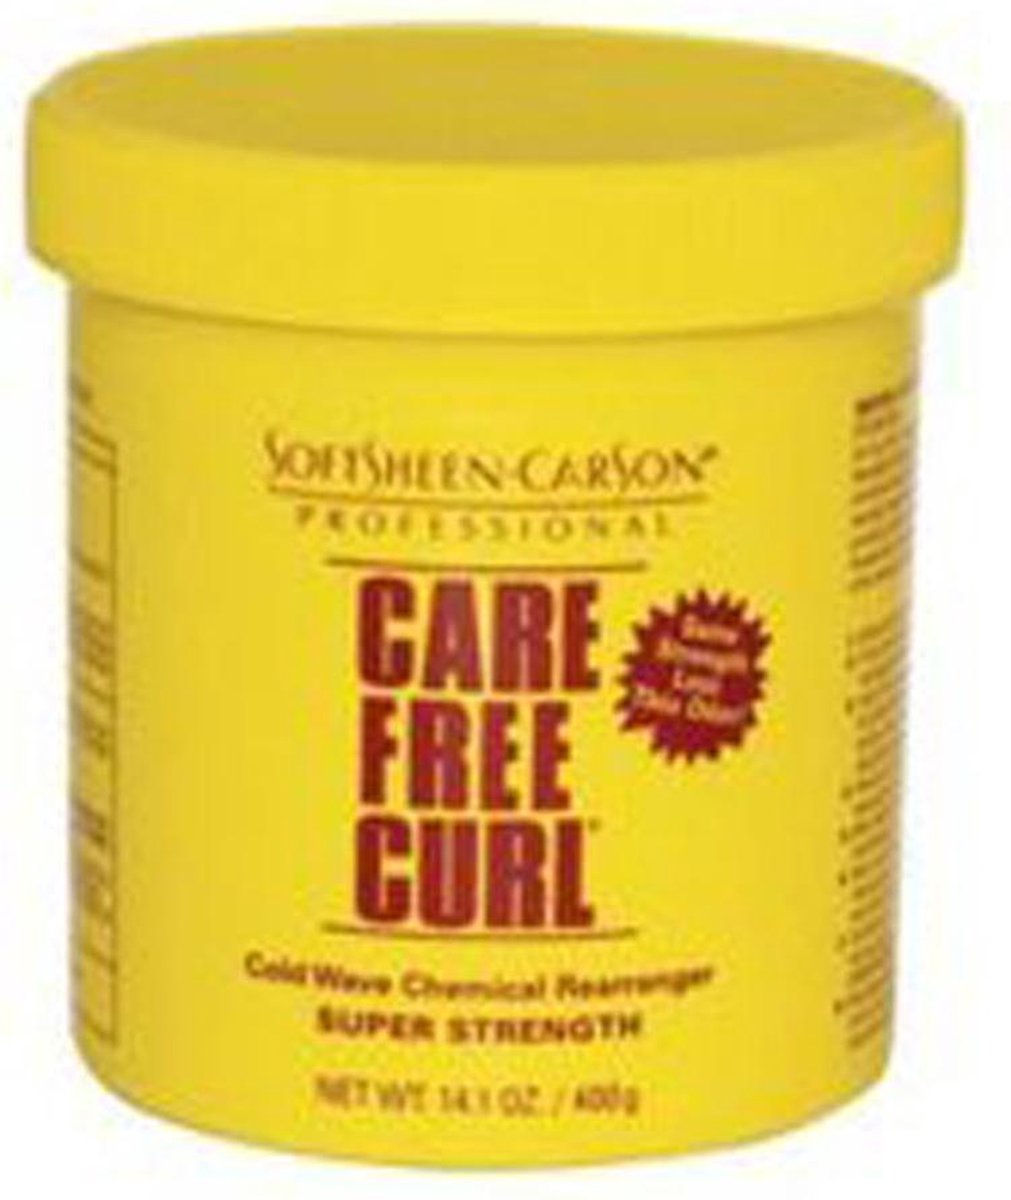 Care Free Curl Cold Wave Chemical Rearranger 474 ml